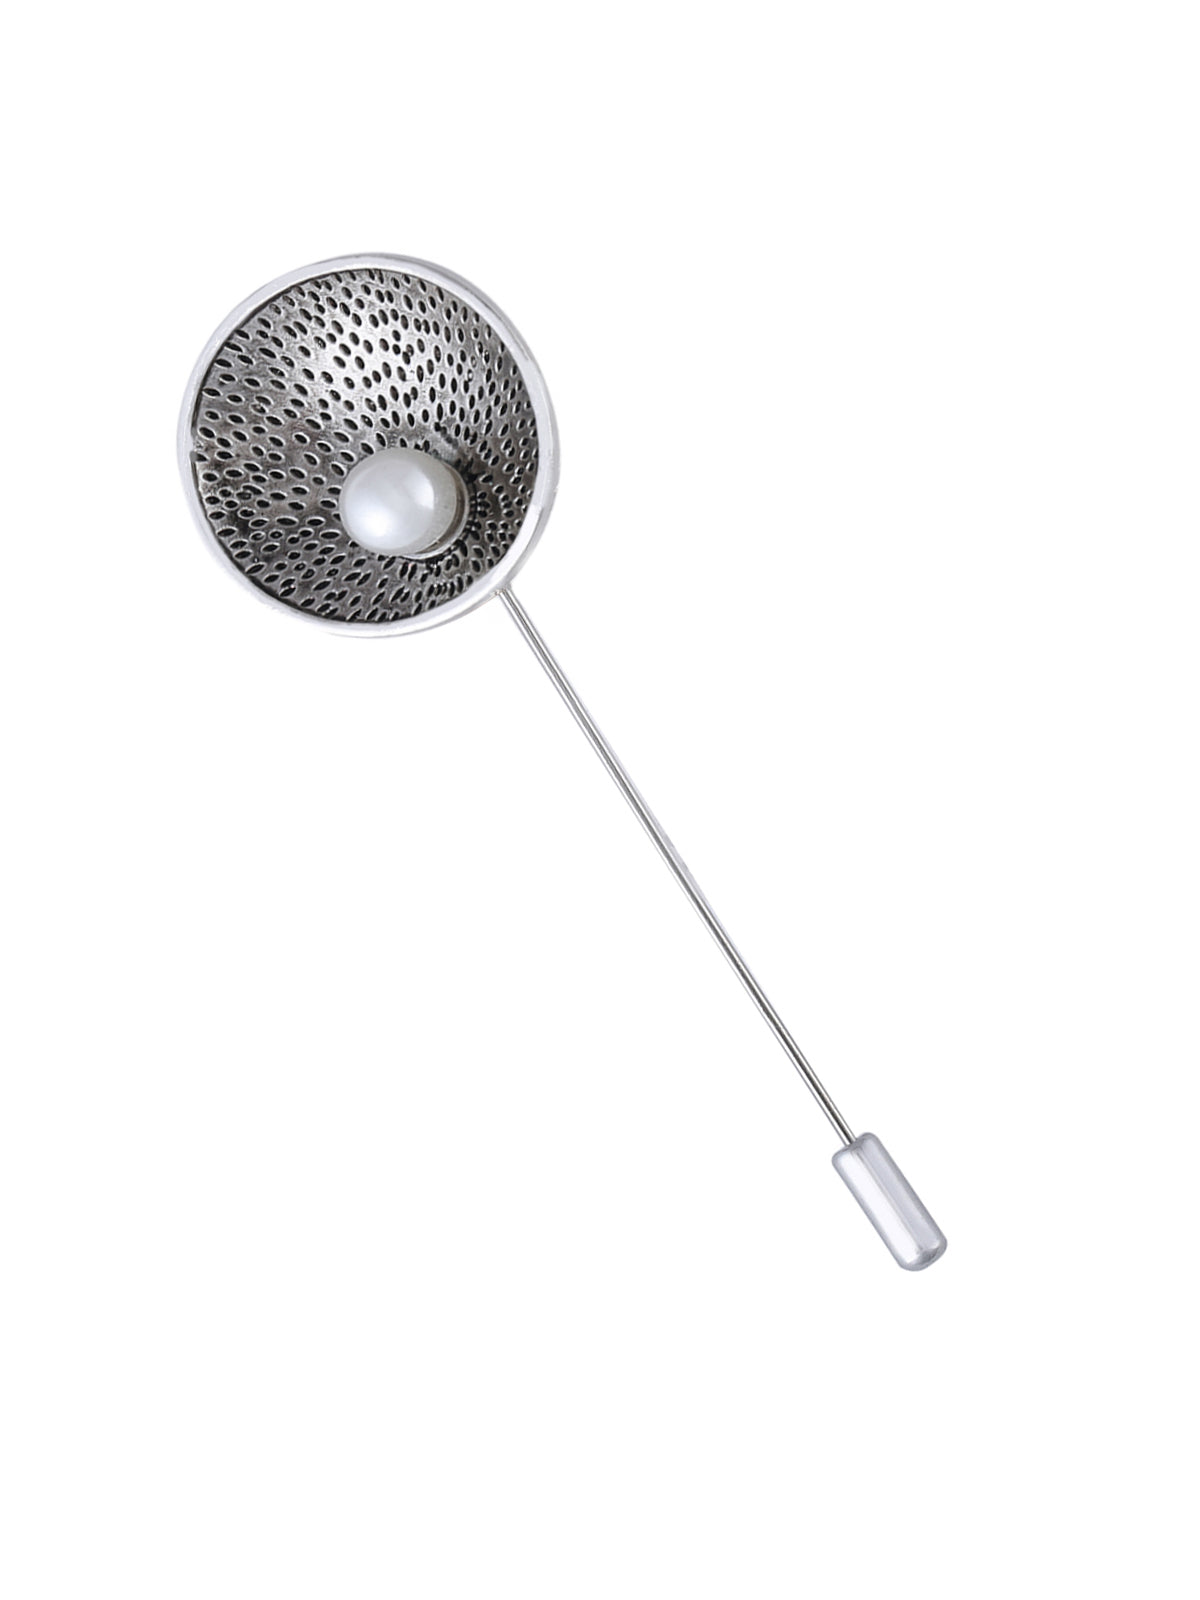 Attractive Dual Silver Tone with Pearl Coat Lapel Pin